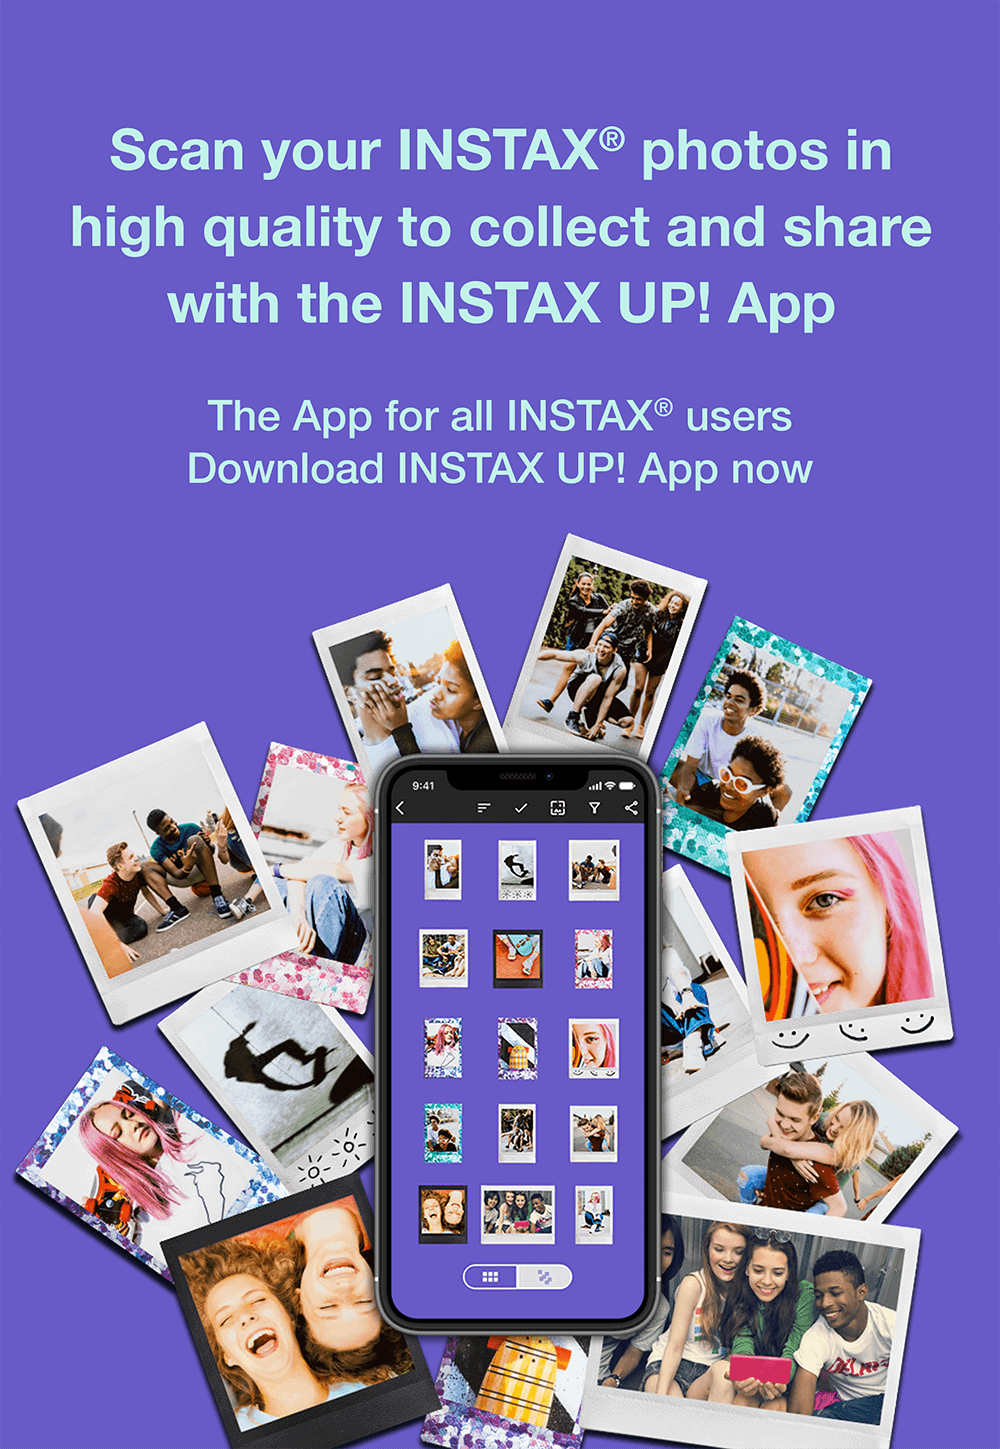 Scan your instax photos in high quality to collect and share with the instax up app. Download now.